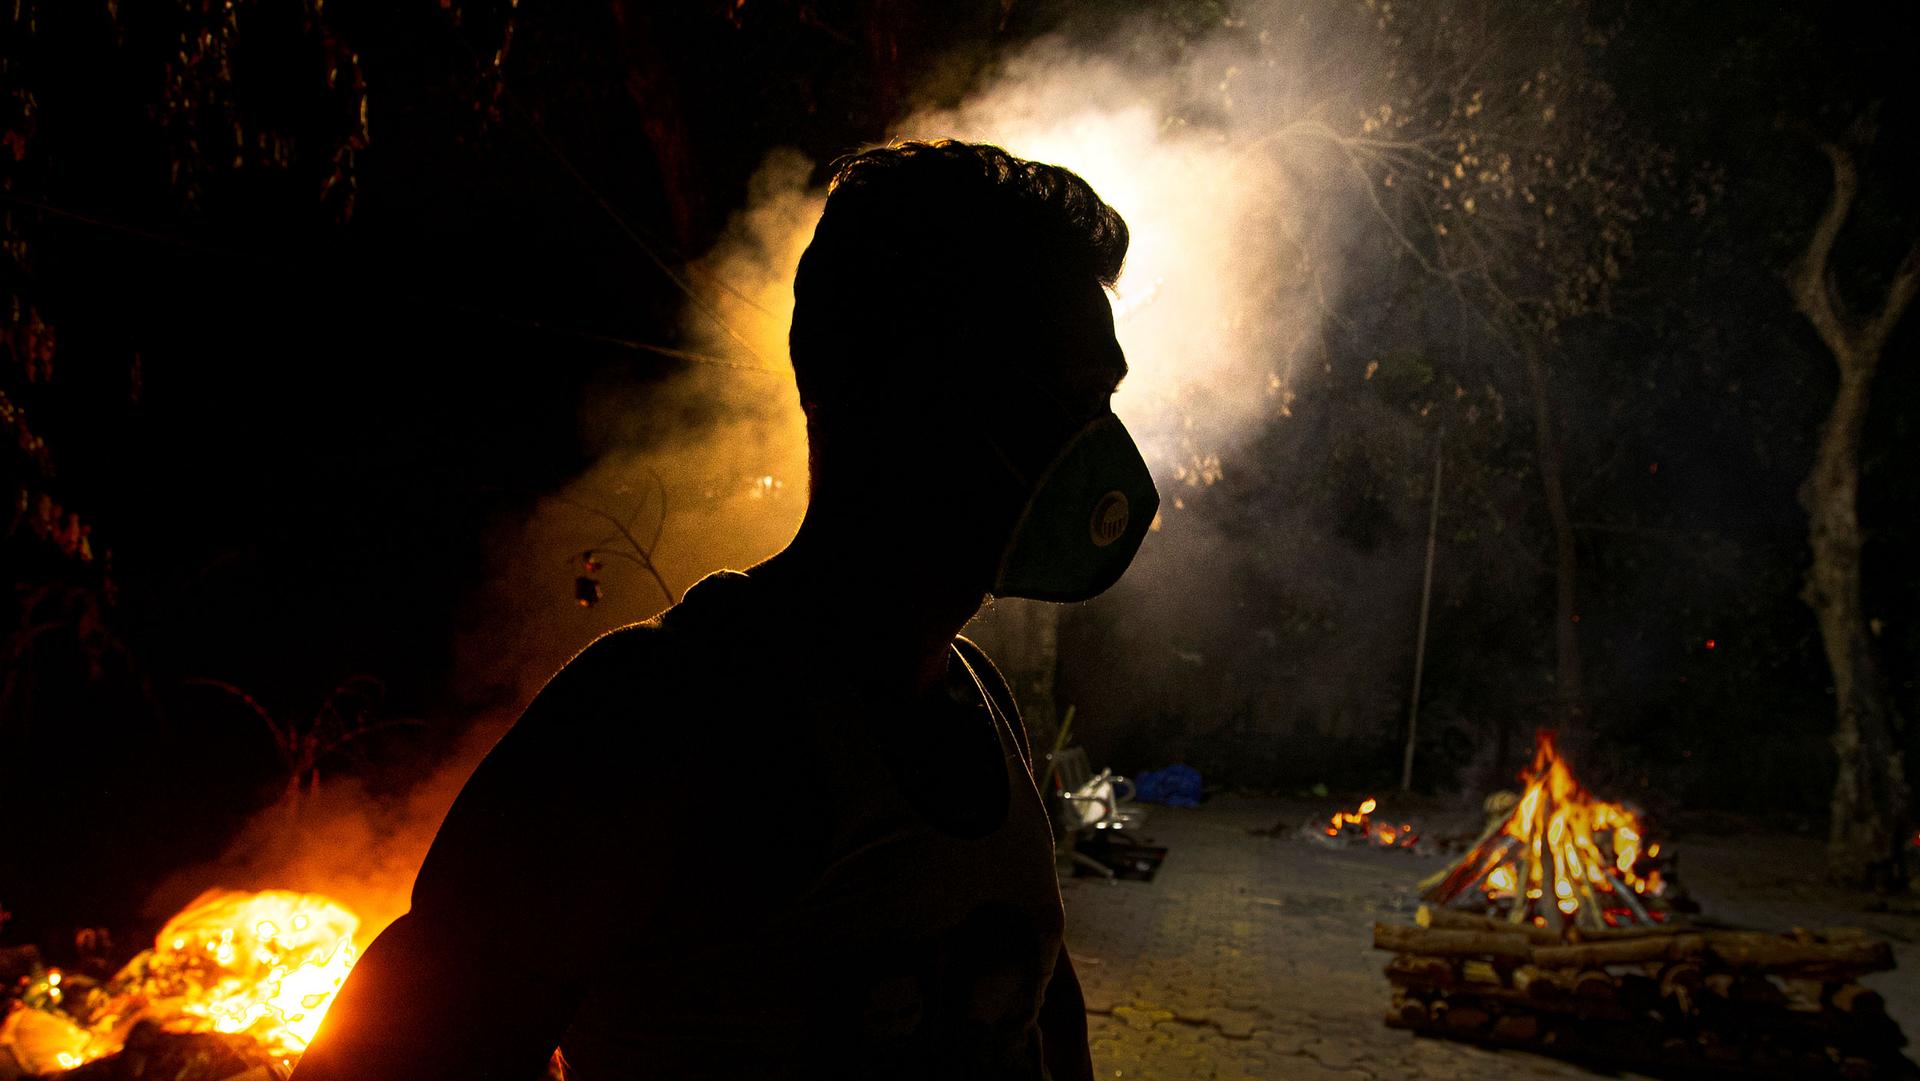 A man is shown in shadow wearing a face mask with several large glowing orange funeral pyres in the distance.